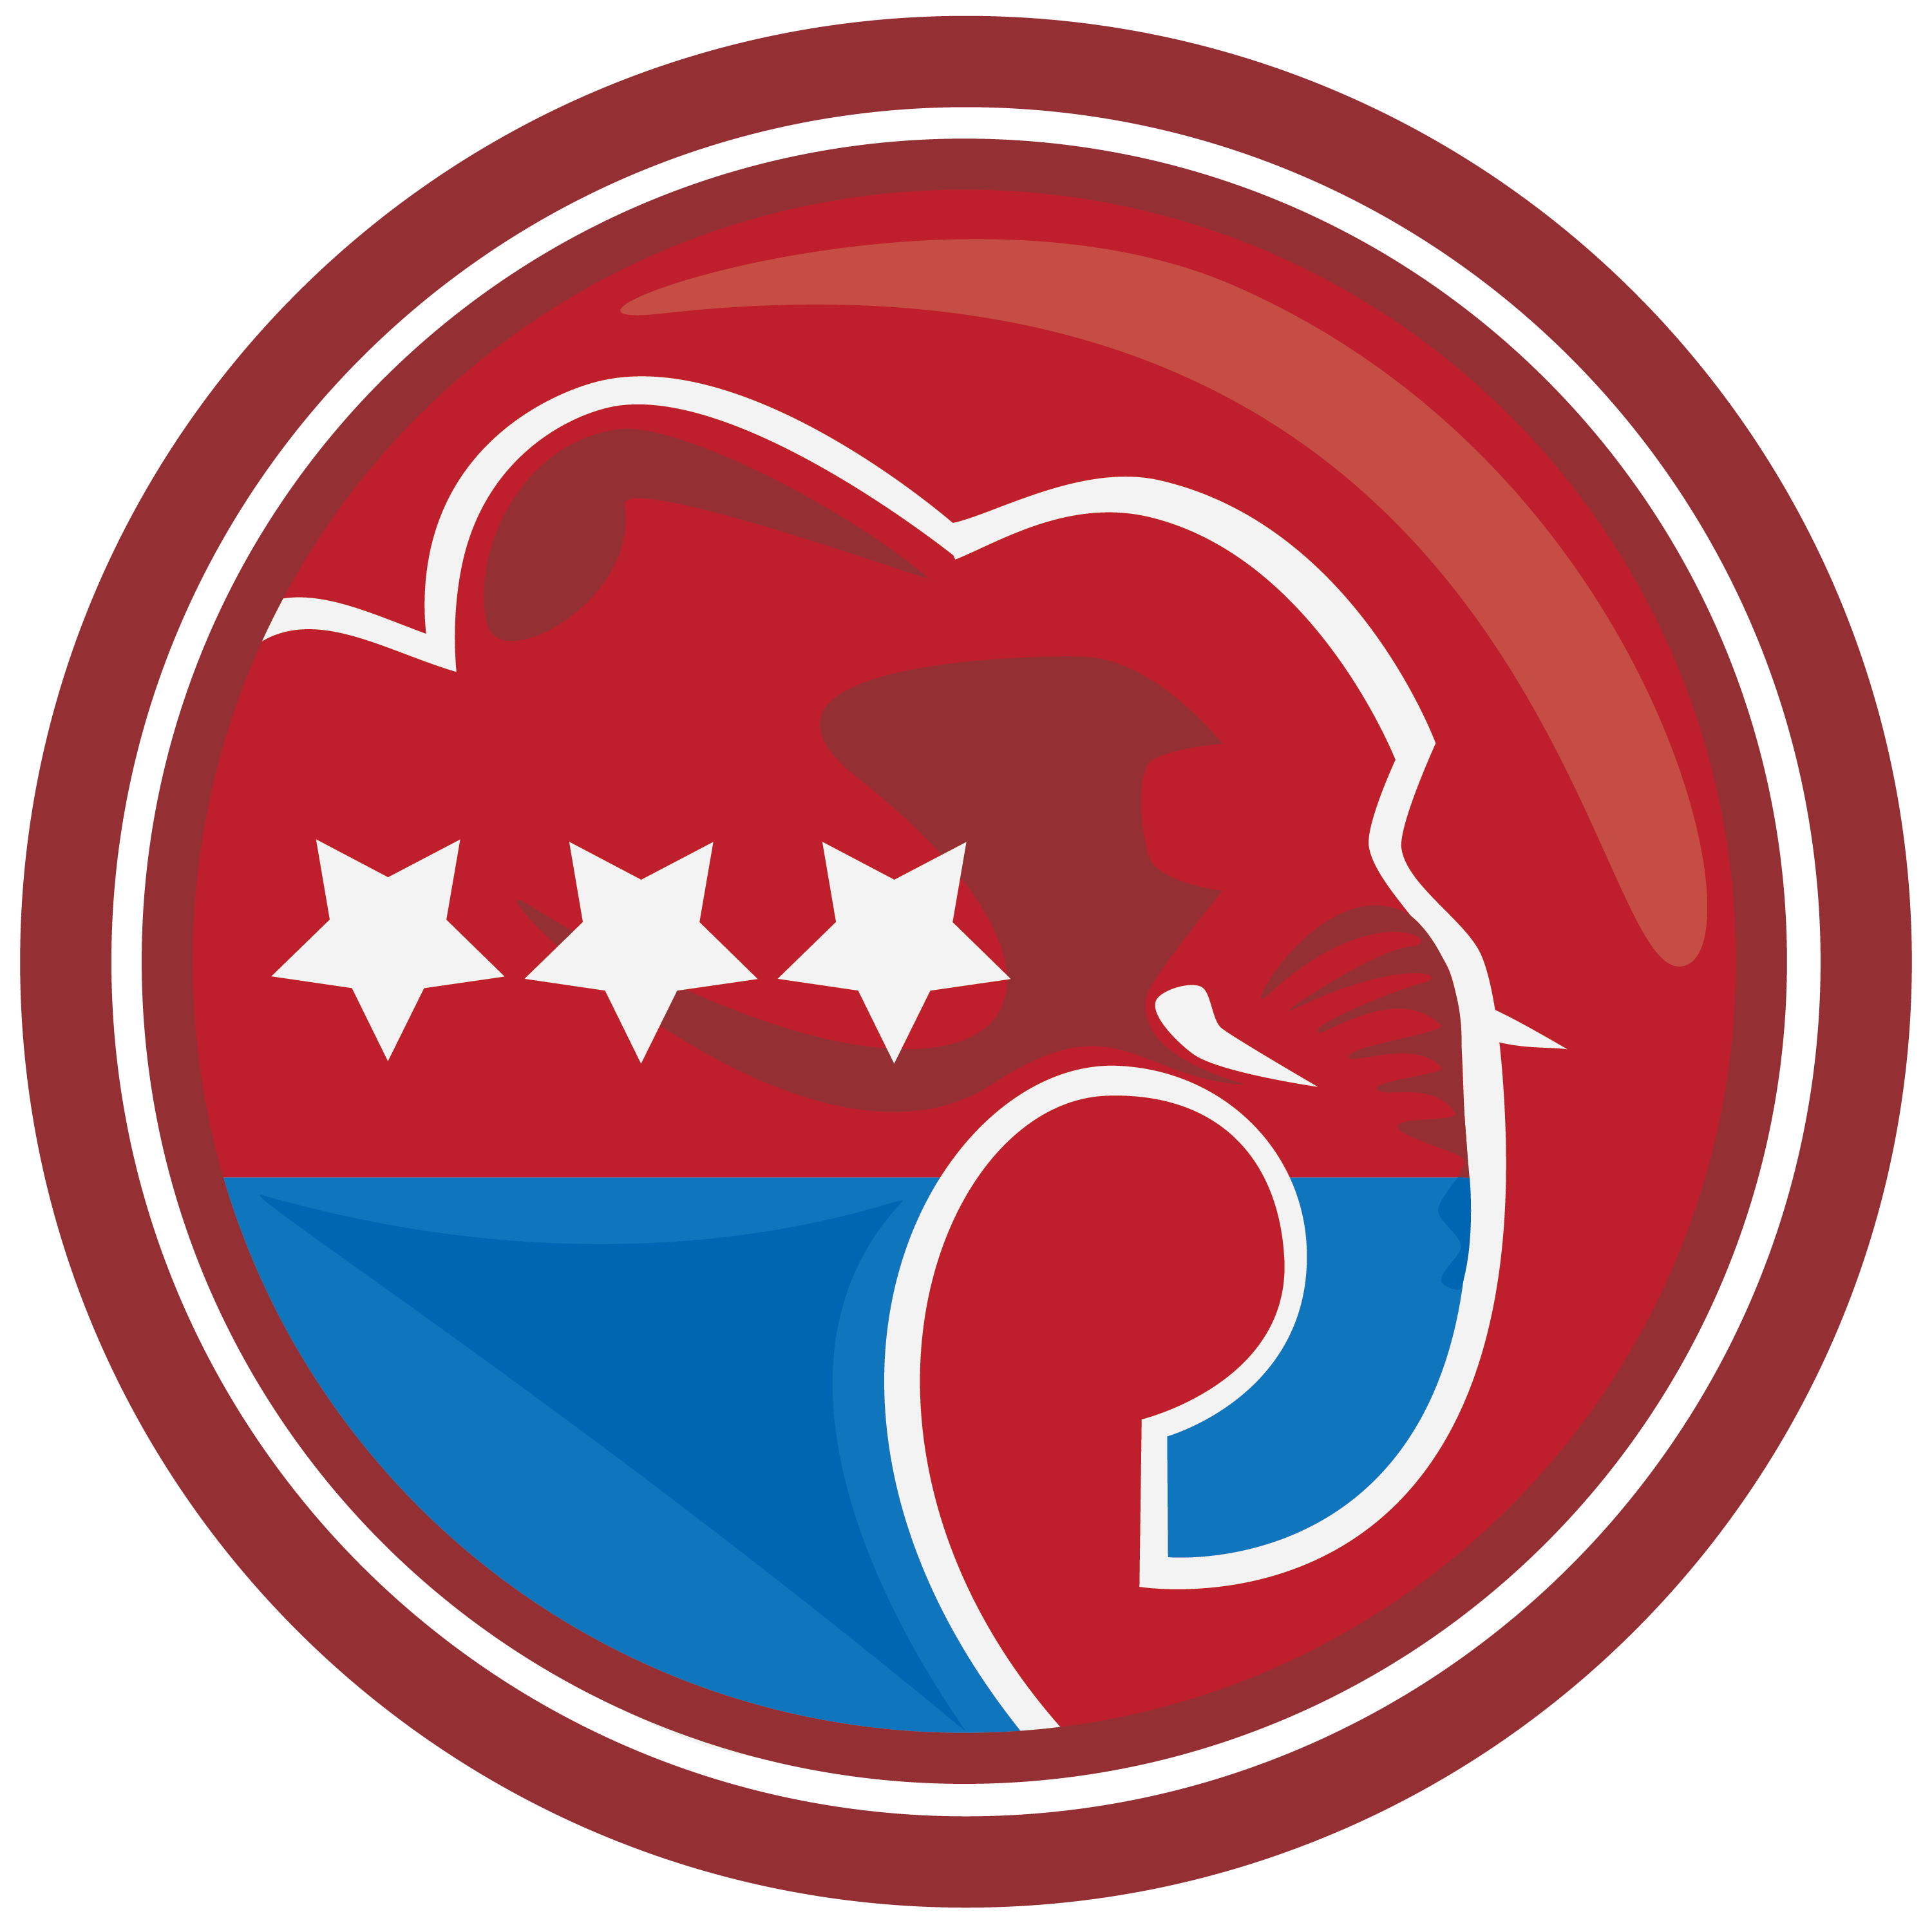 Republican Party Elephant - Clipart library